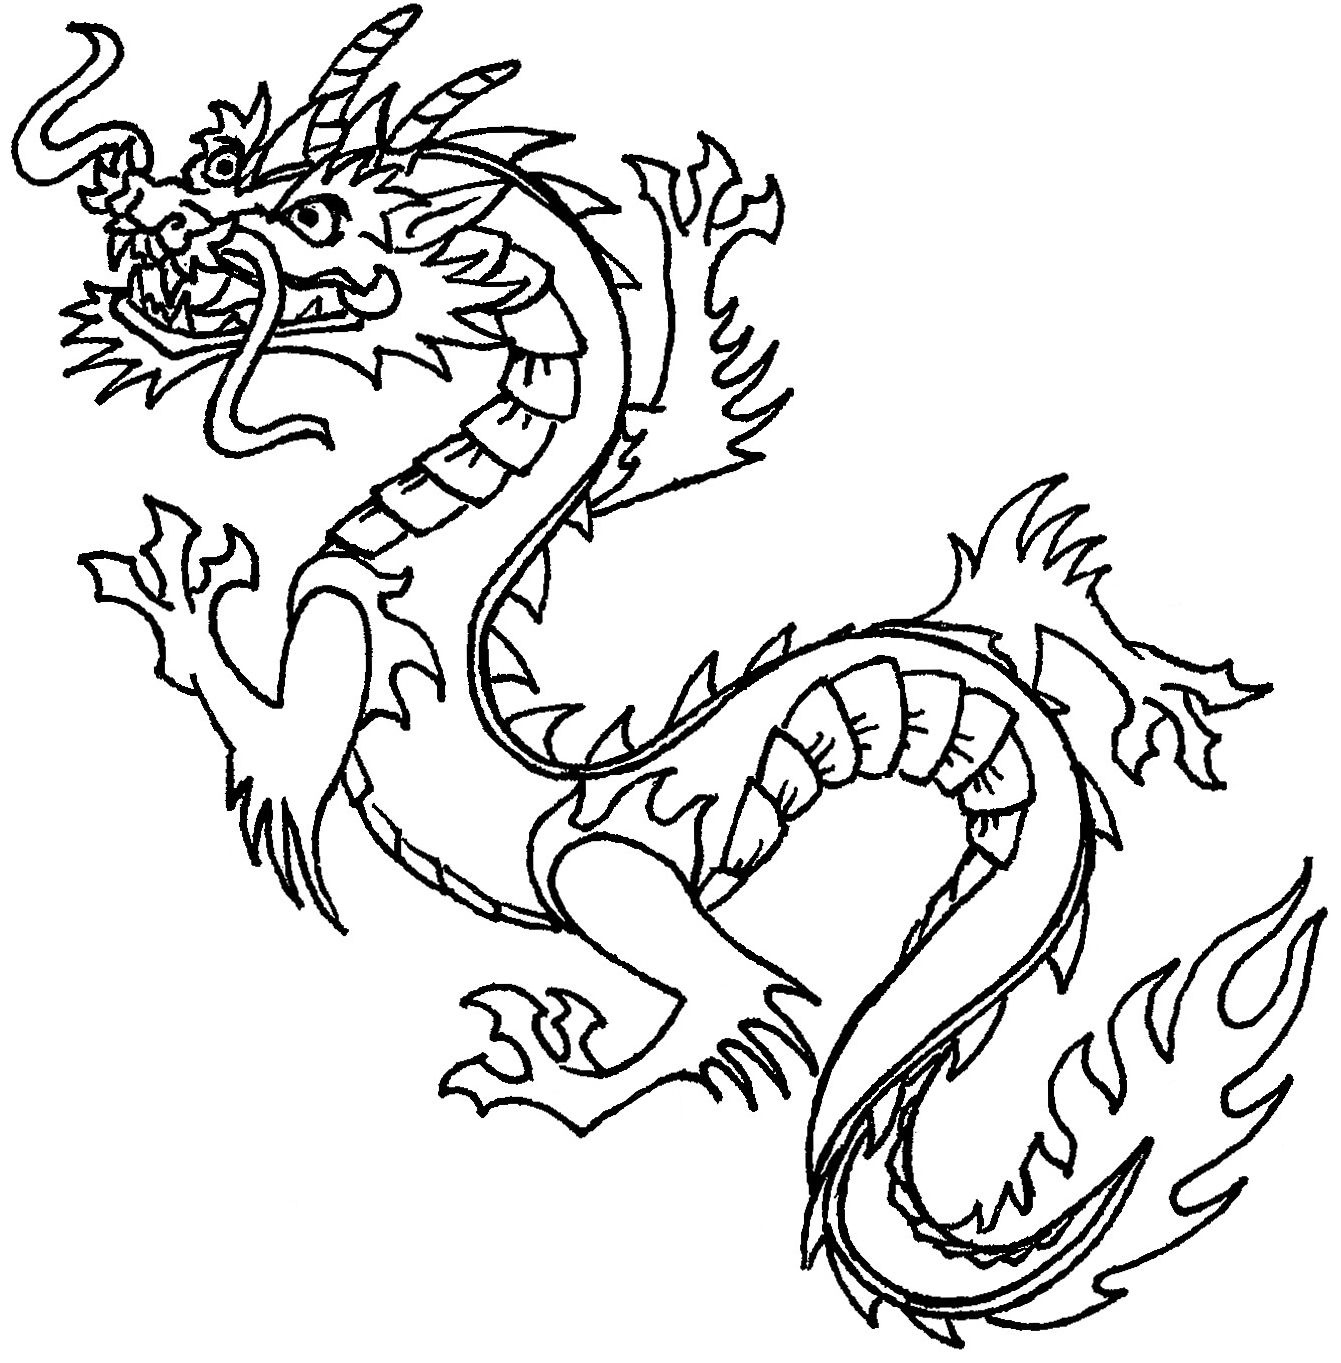 Free Printable Chinese Dragon Coloring Pages For Kids | Stencils - Free Printable Chinese Dragon Coloring Pages